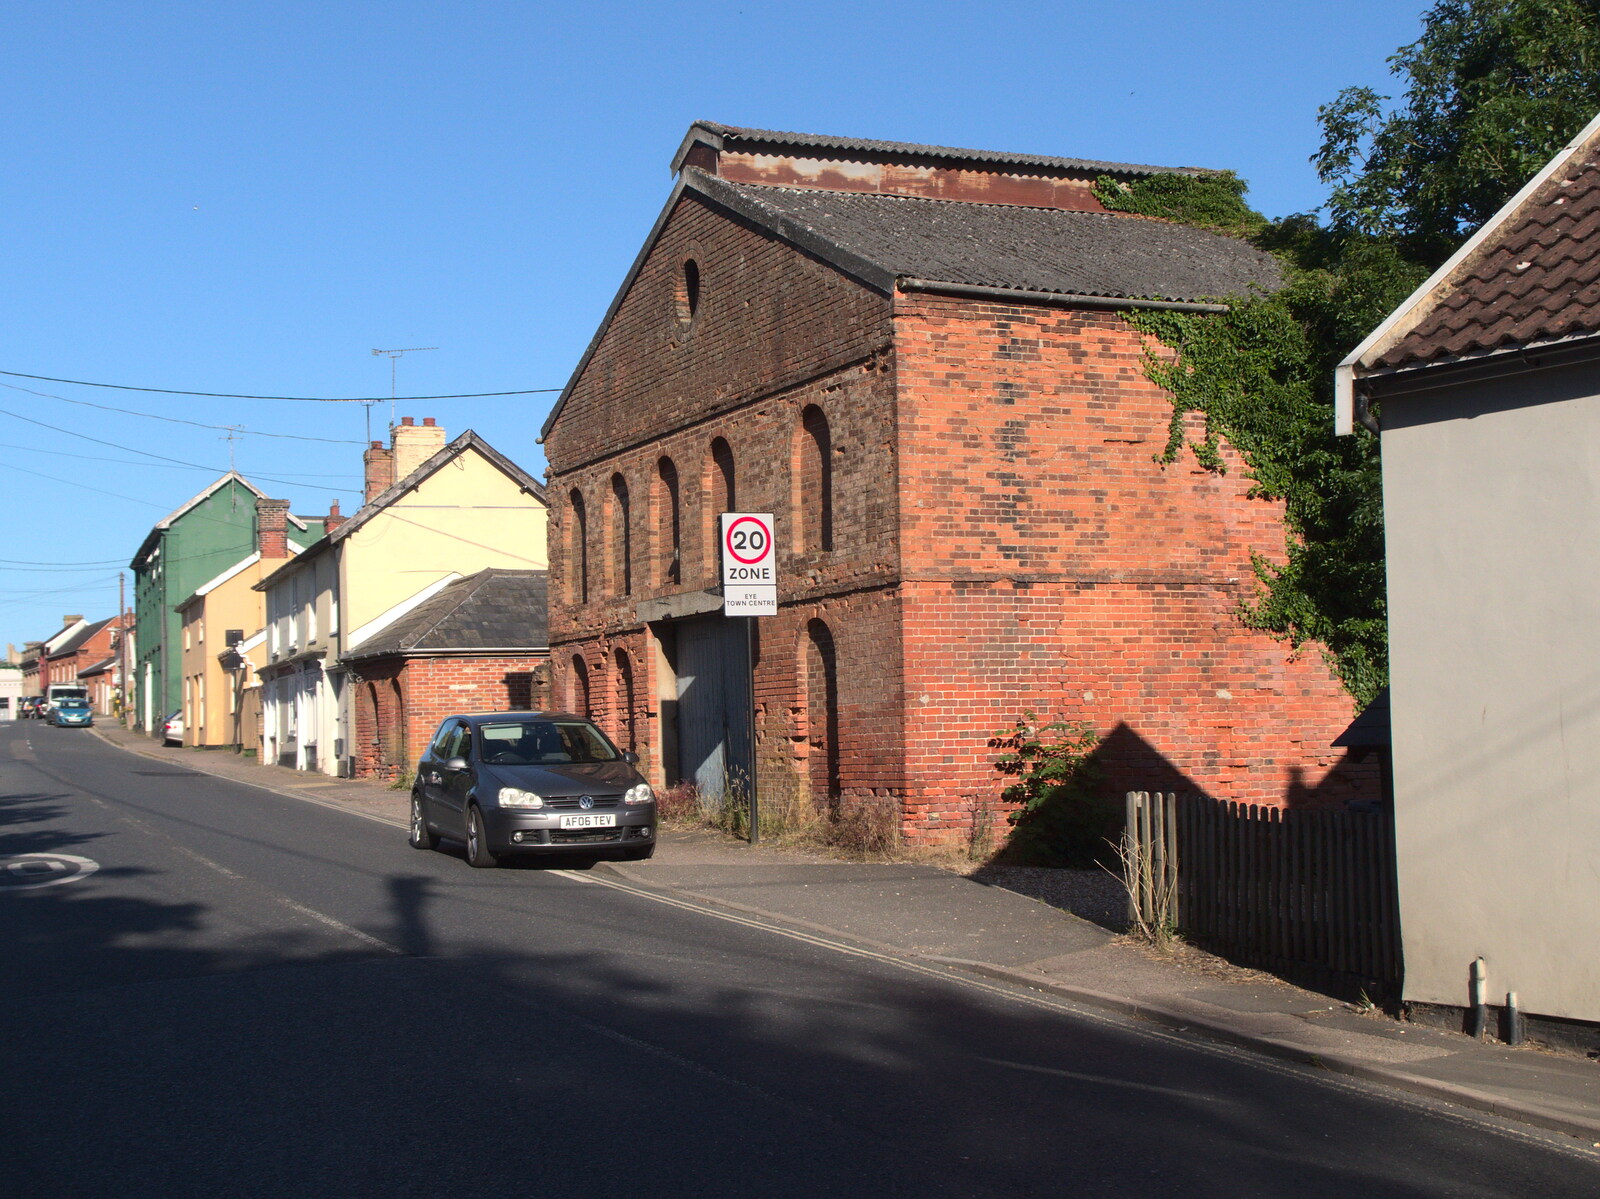 The old fire station on Magdalen Street from Hares, Tortoises and Station 119, Eye, Suffolk - 19th July 2021